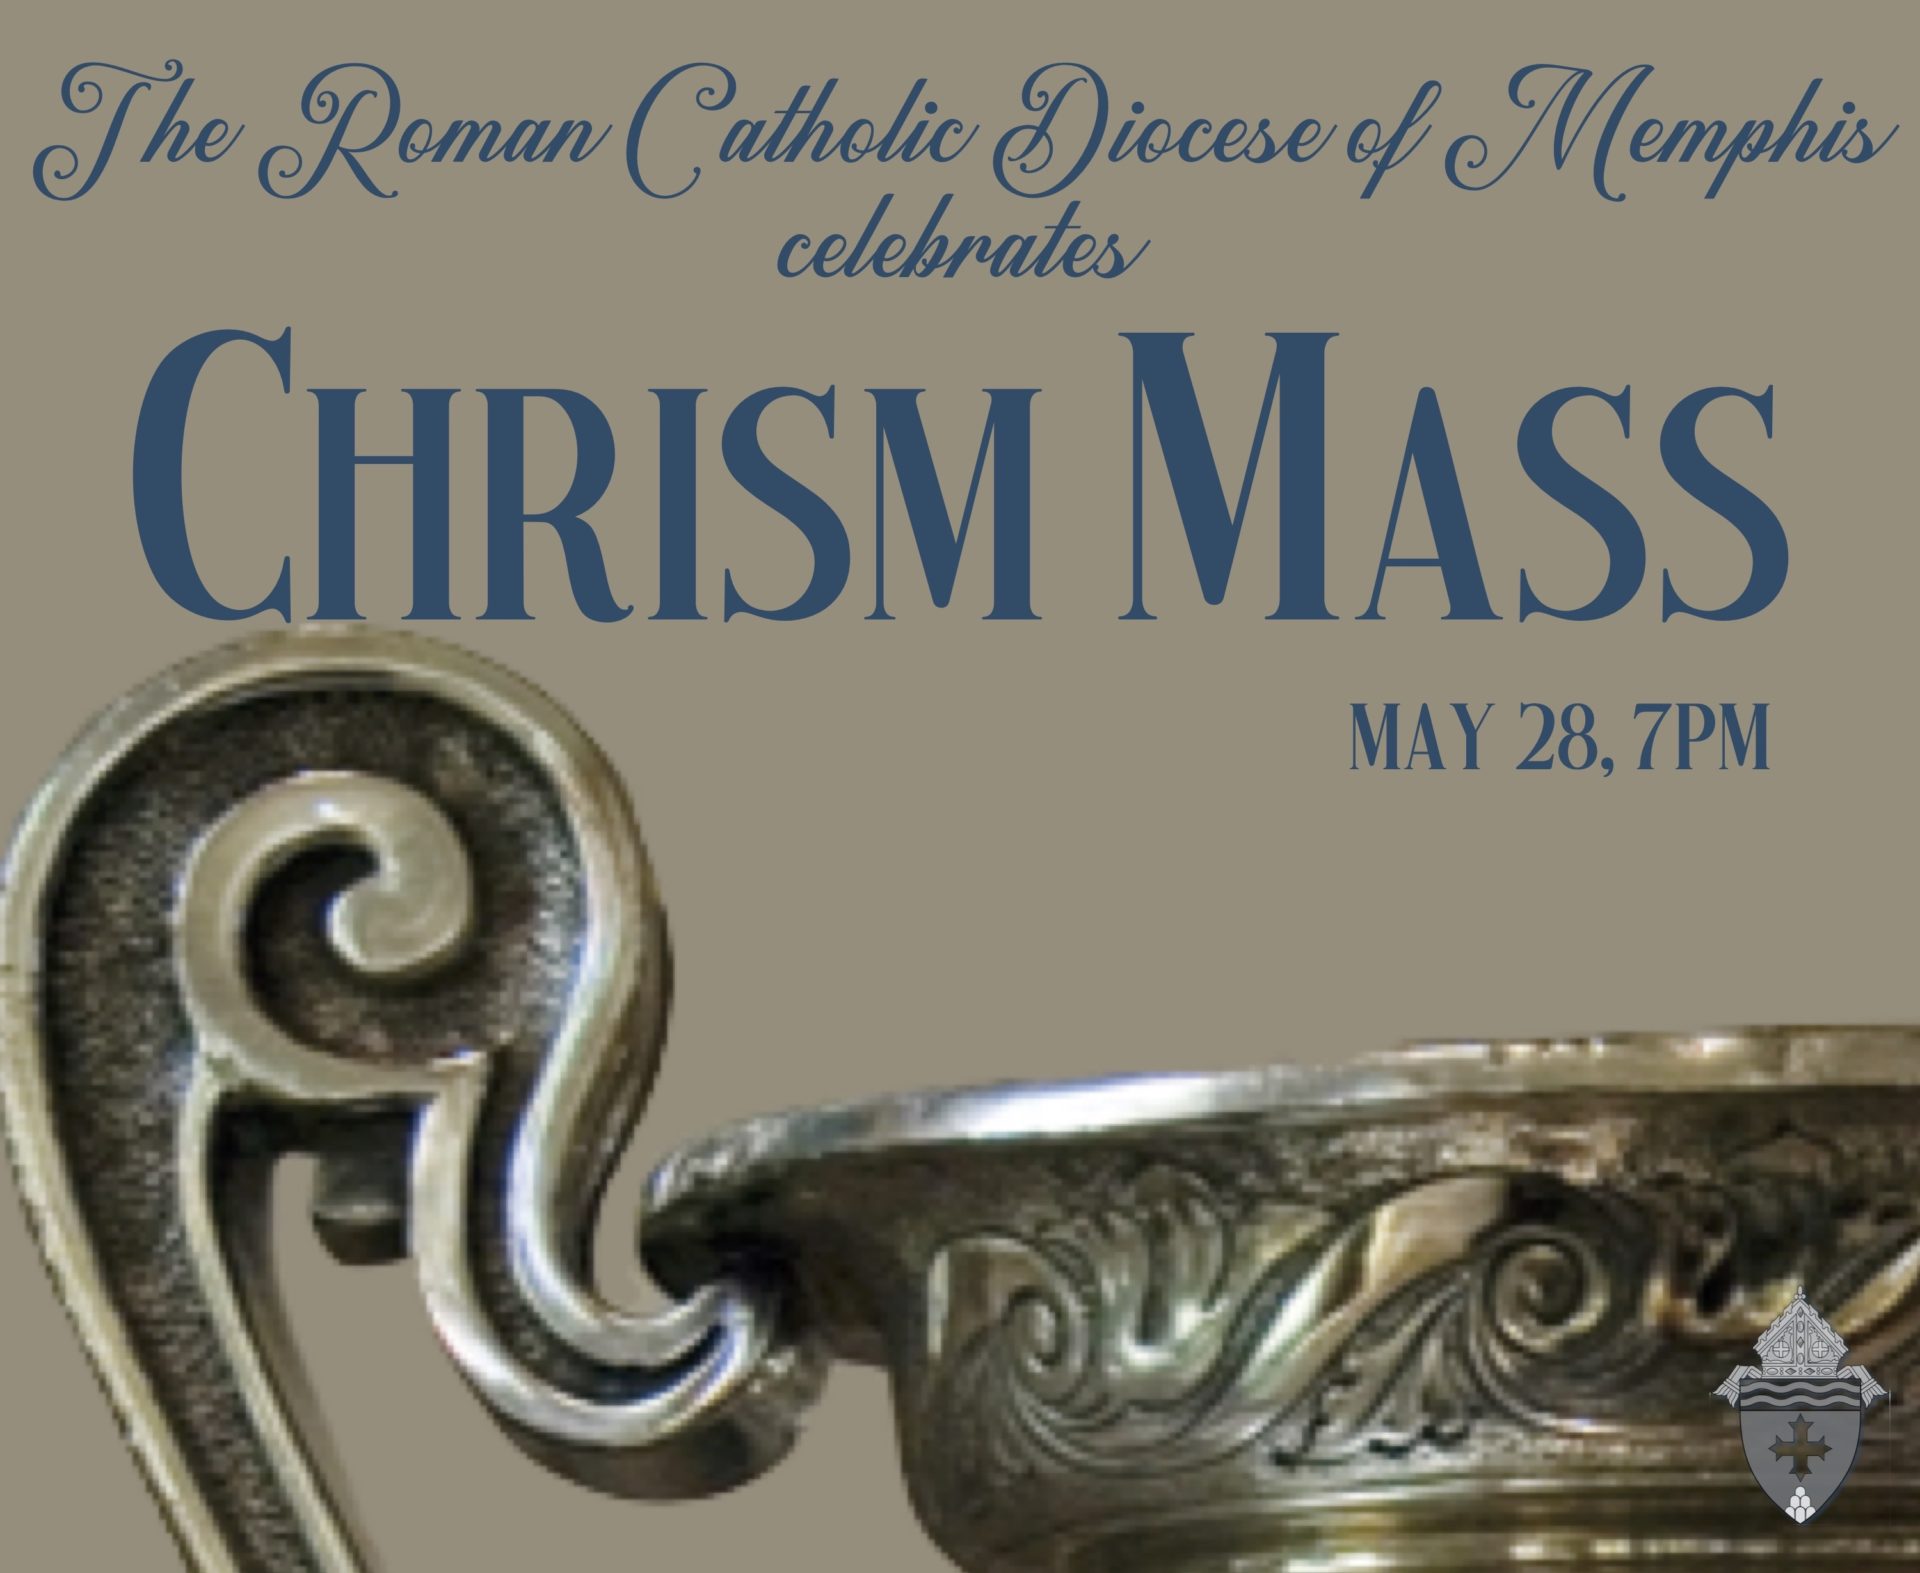 Chrism Mass is a Celebration that Includes the Renewal of Priestly